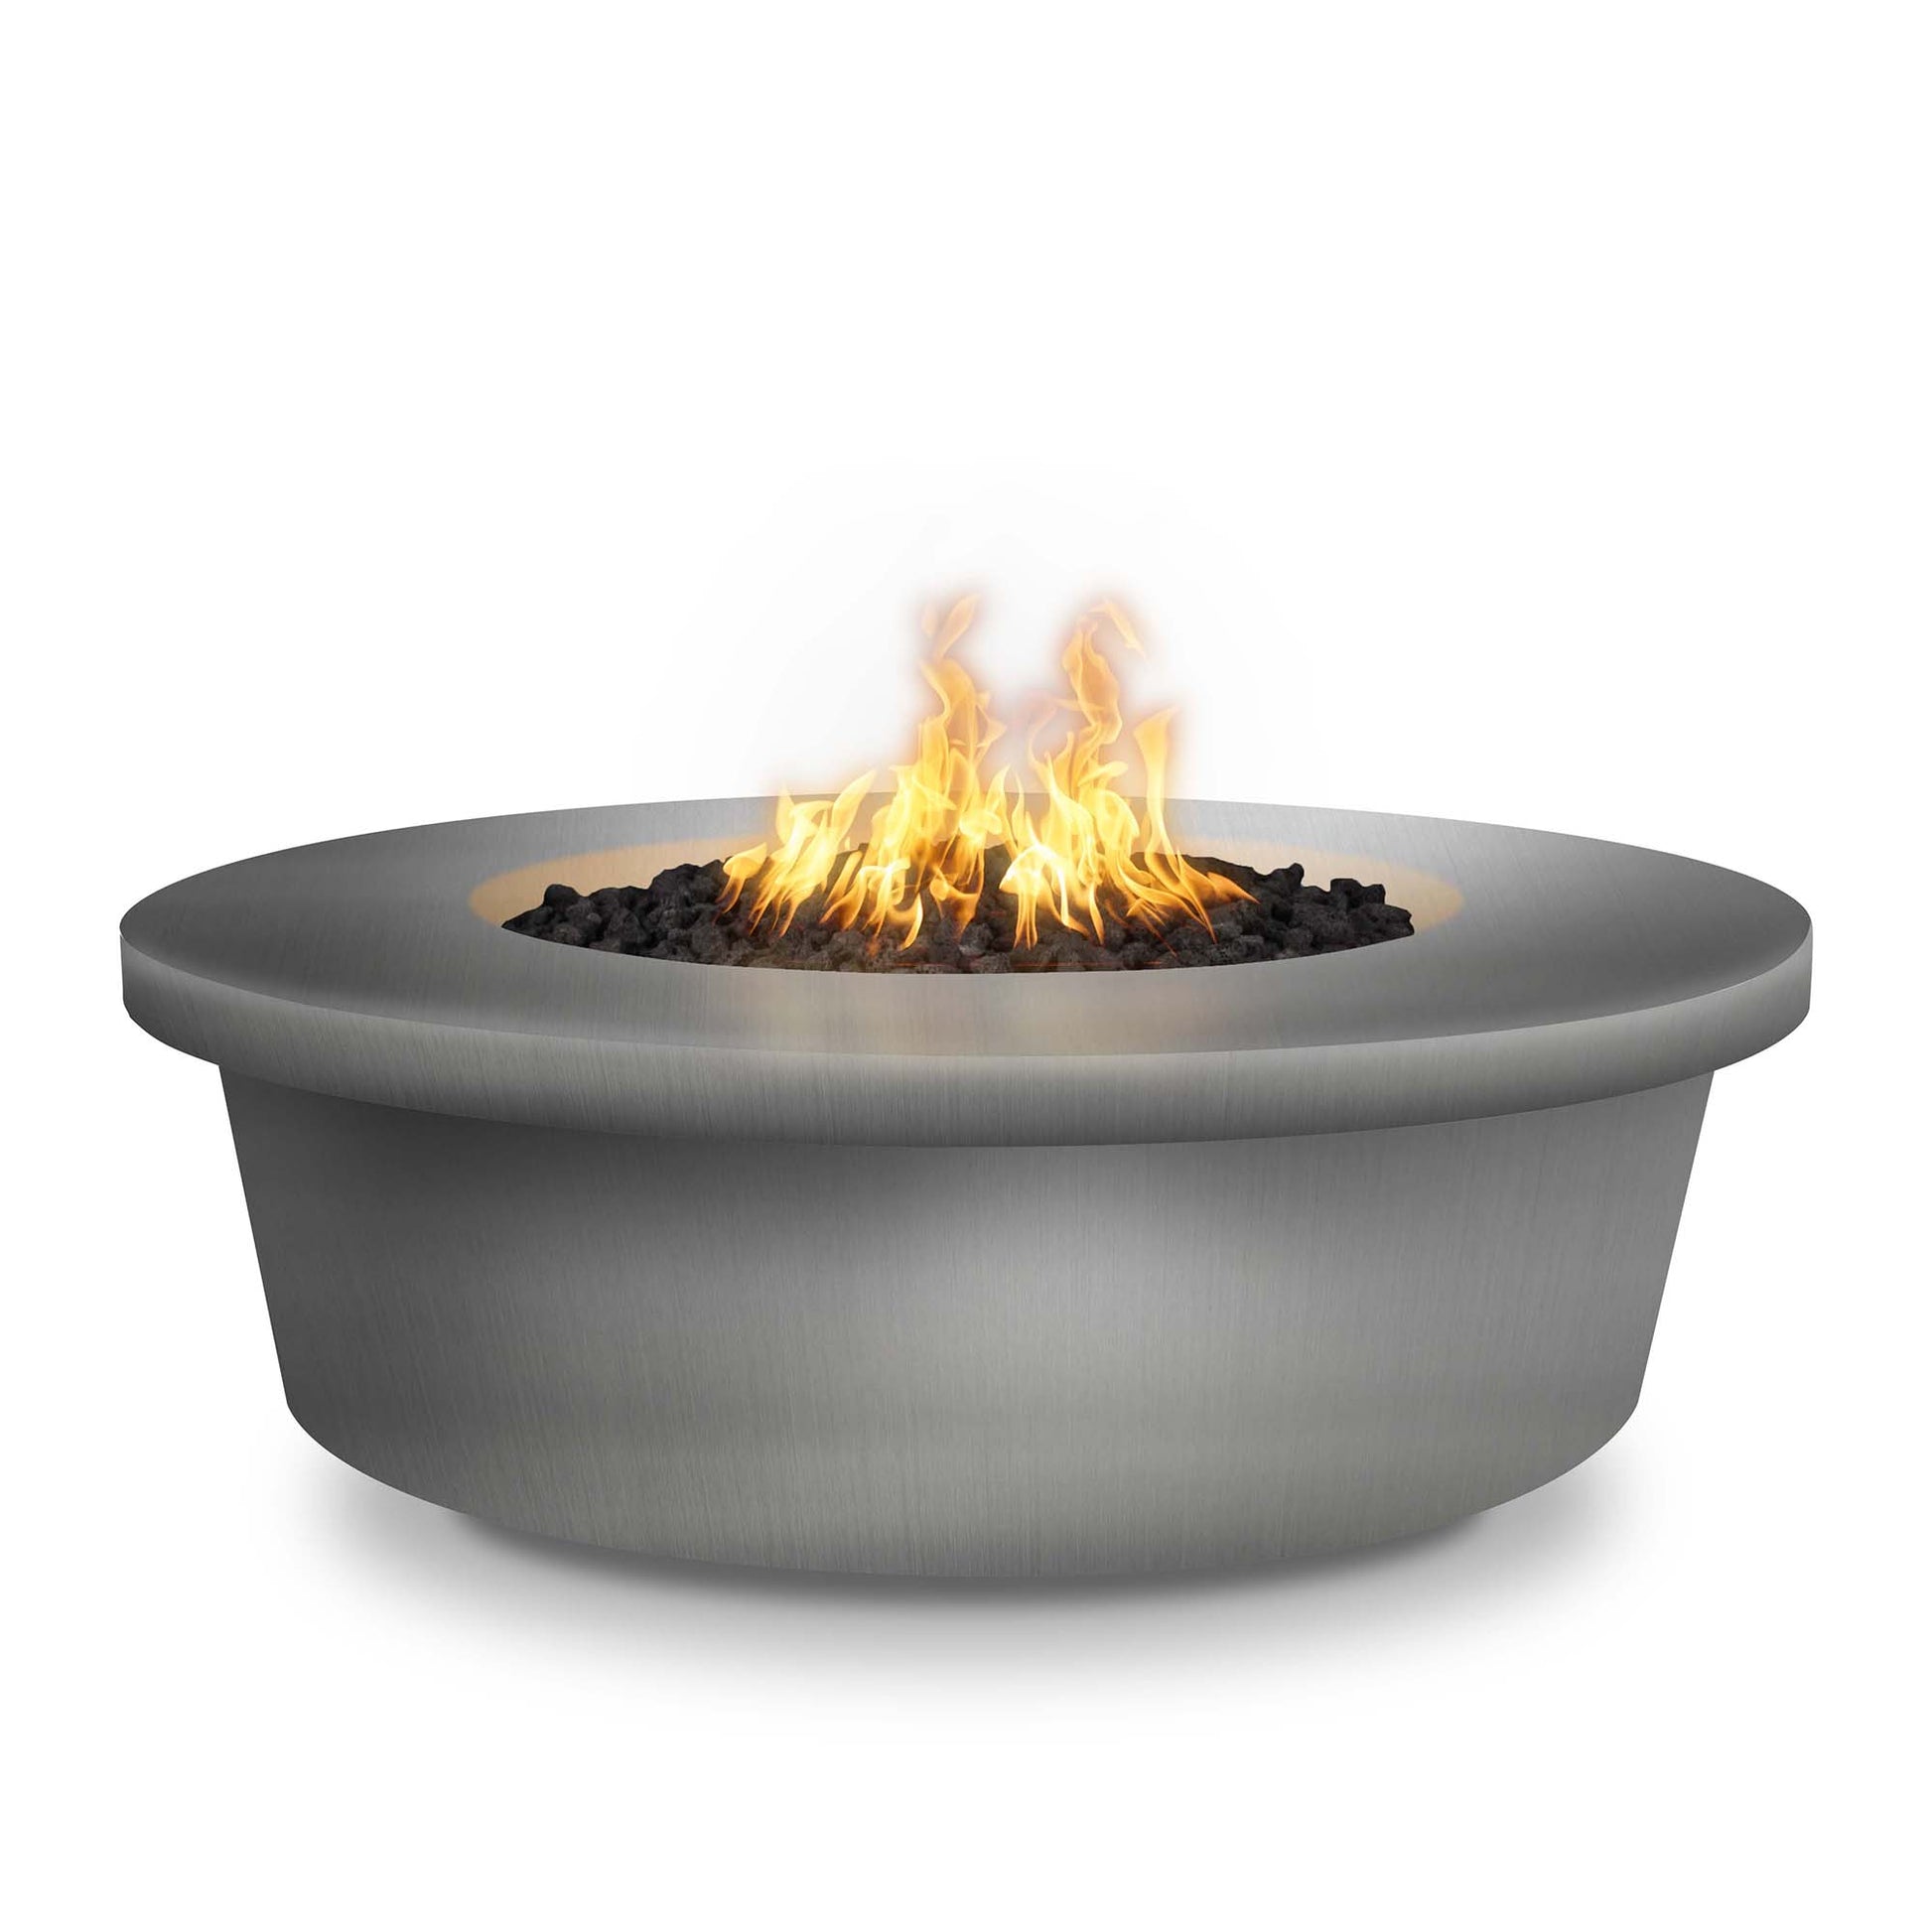 The Outdoor Plus Round Tempe 48" Hammered Copper Natural Gas Fire Pit with Flame Sense with Spark Ignition